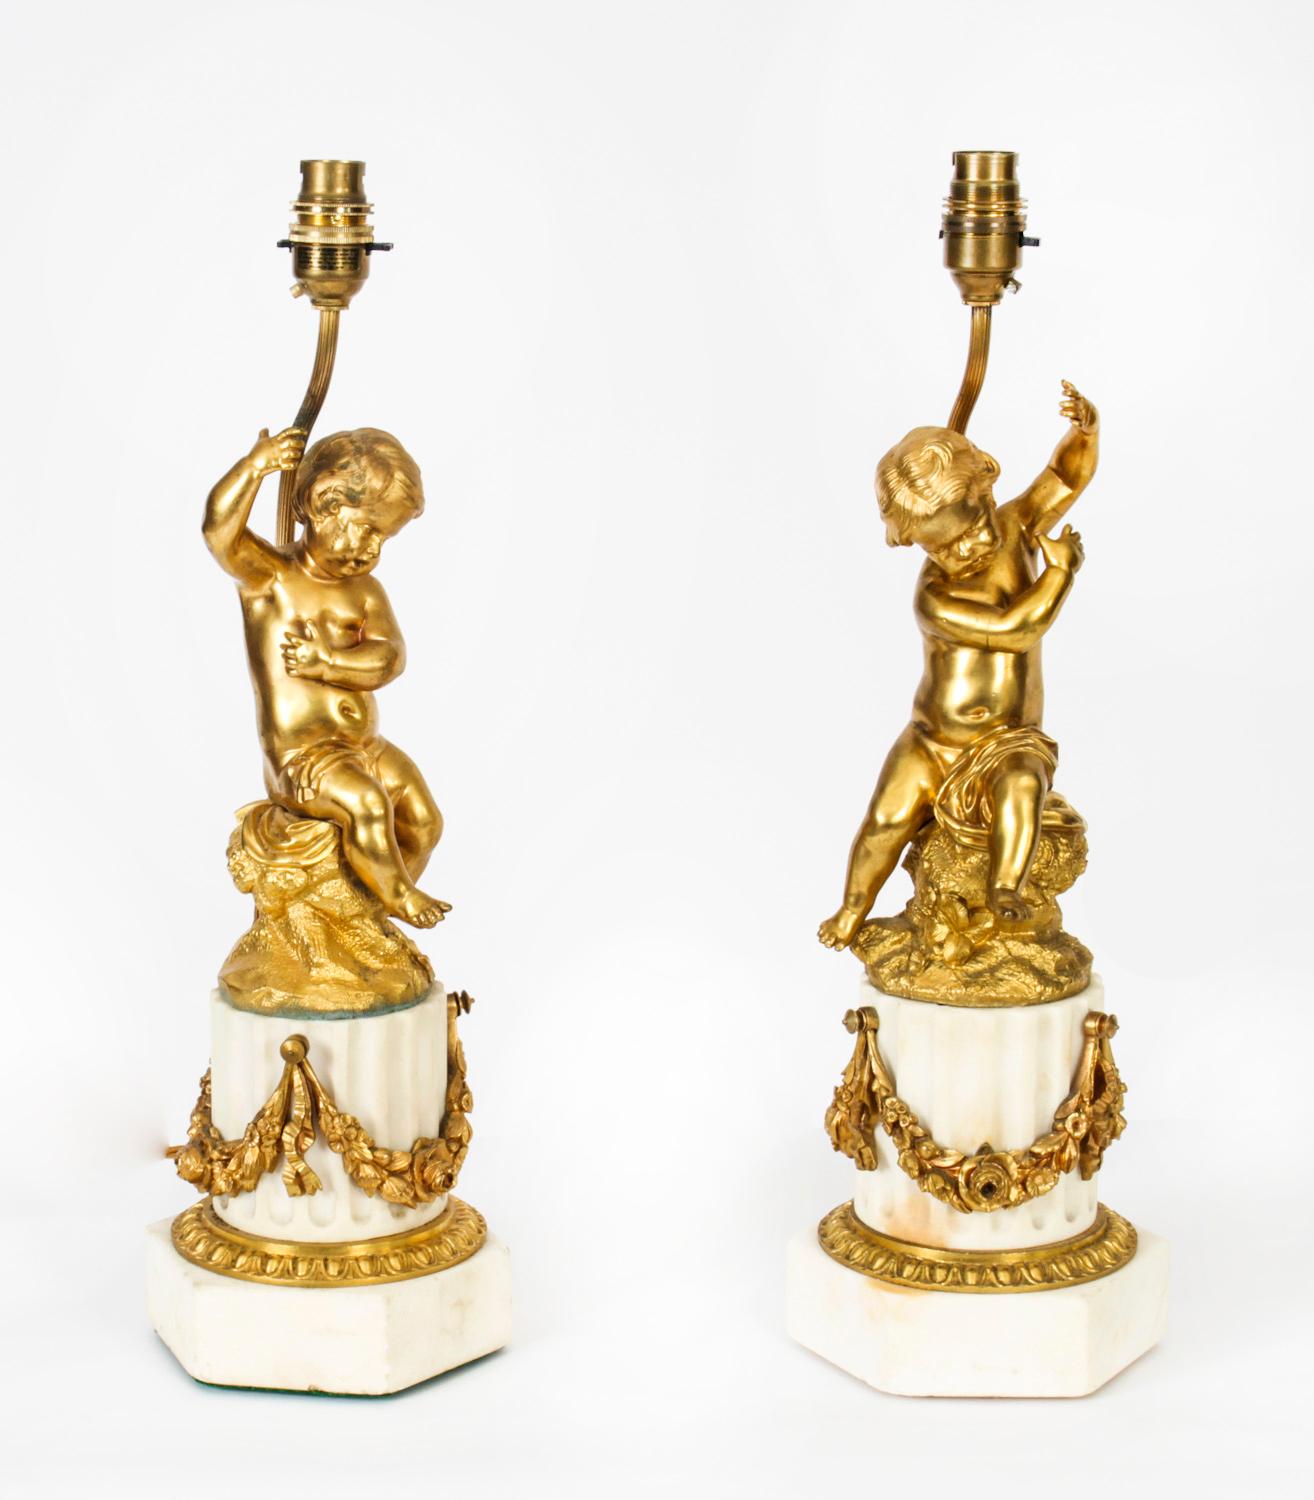 A magnificent antique pair of French ormolu table lamps with shades, Circa 1920 in date. 

The stems formed as putto seated upon naturalistically modelled stumps, each upon a fluted marble column base detailed with ormolu floral swag, and a